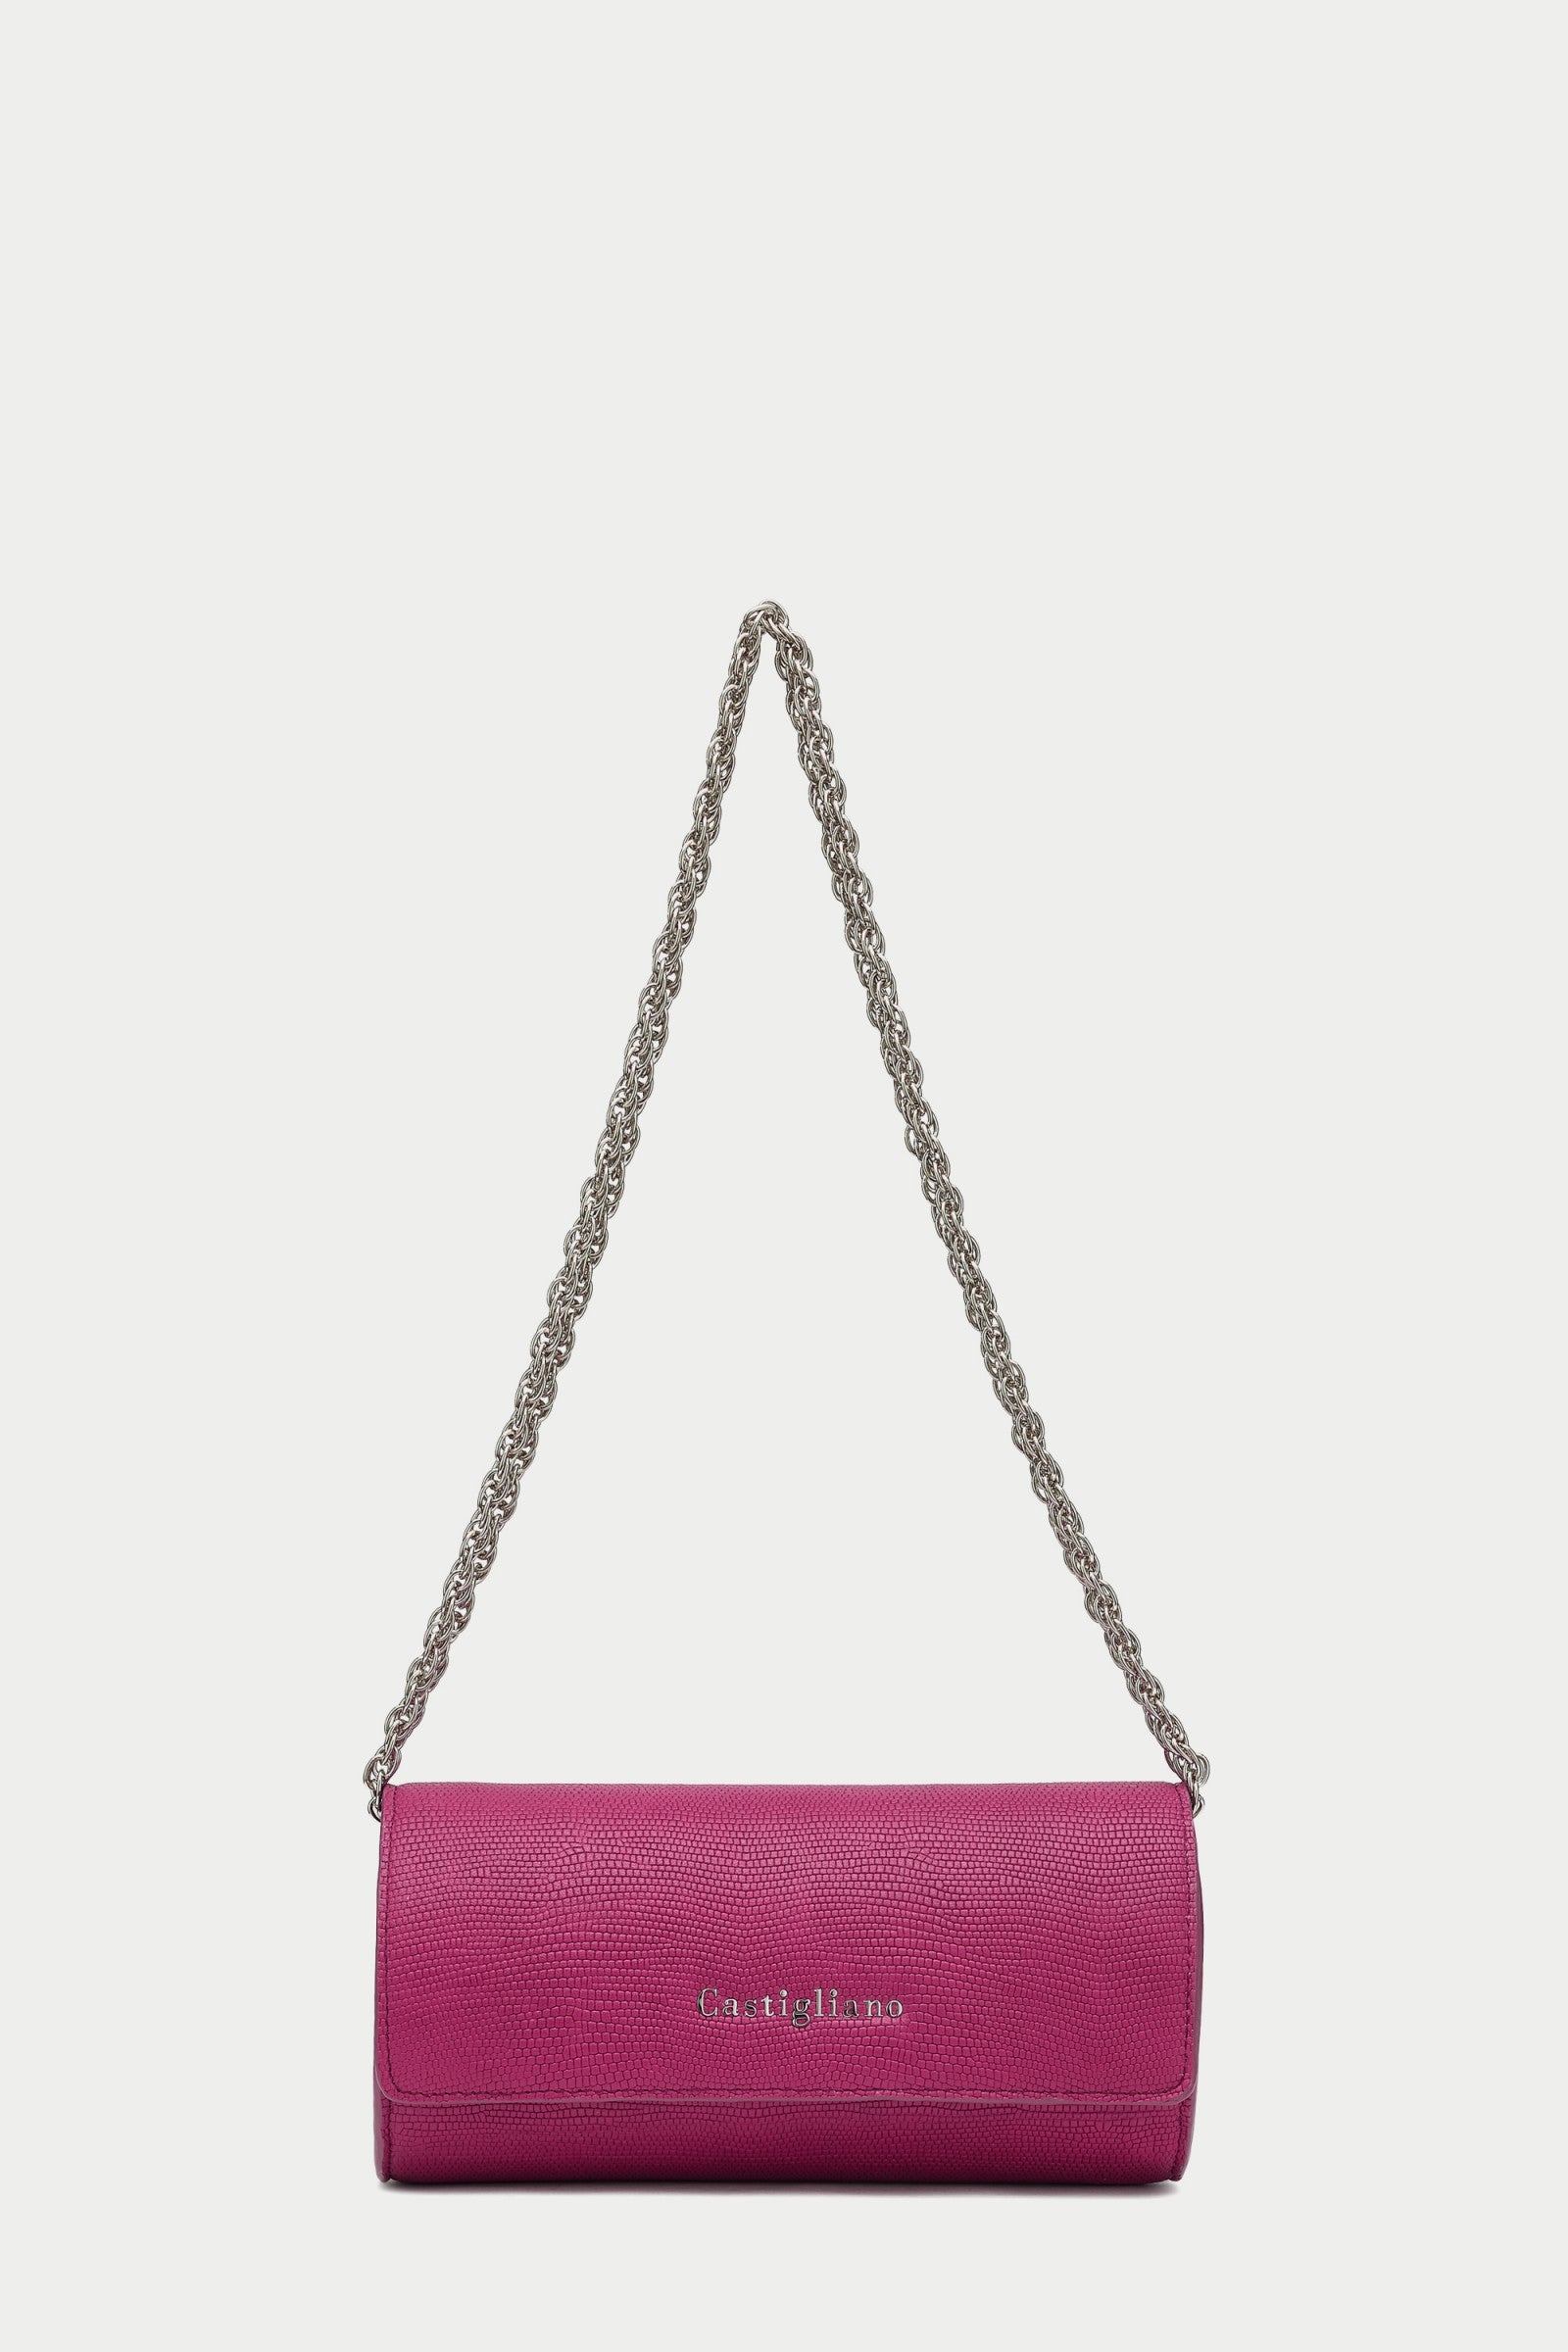 Kinsely FUXIA Leather Roll Clutch